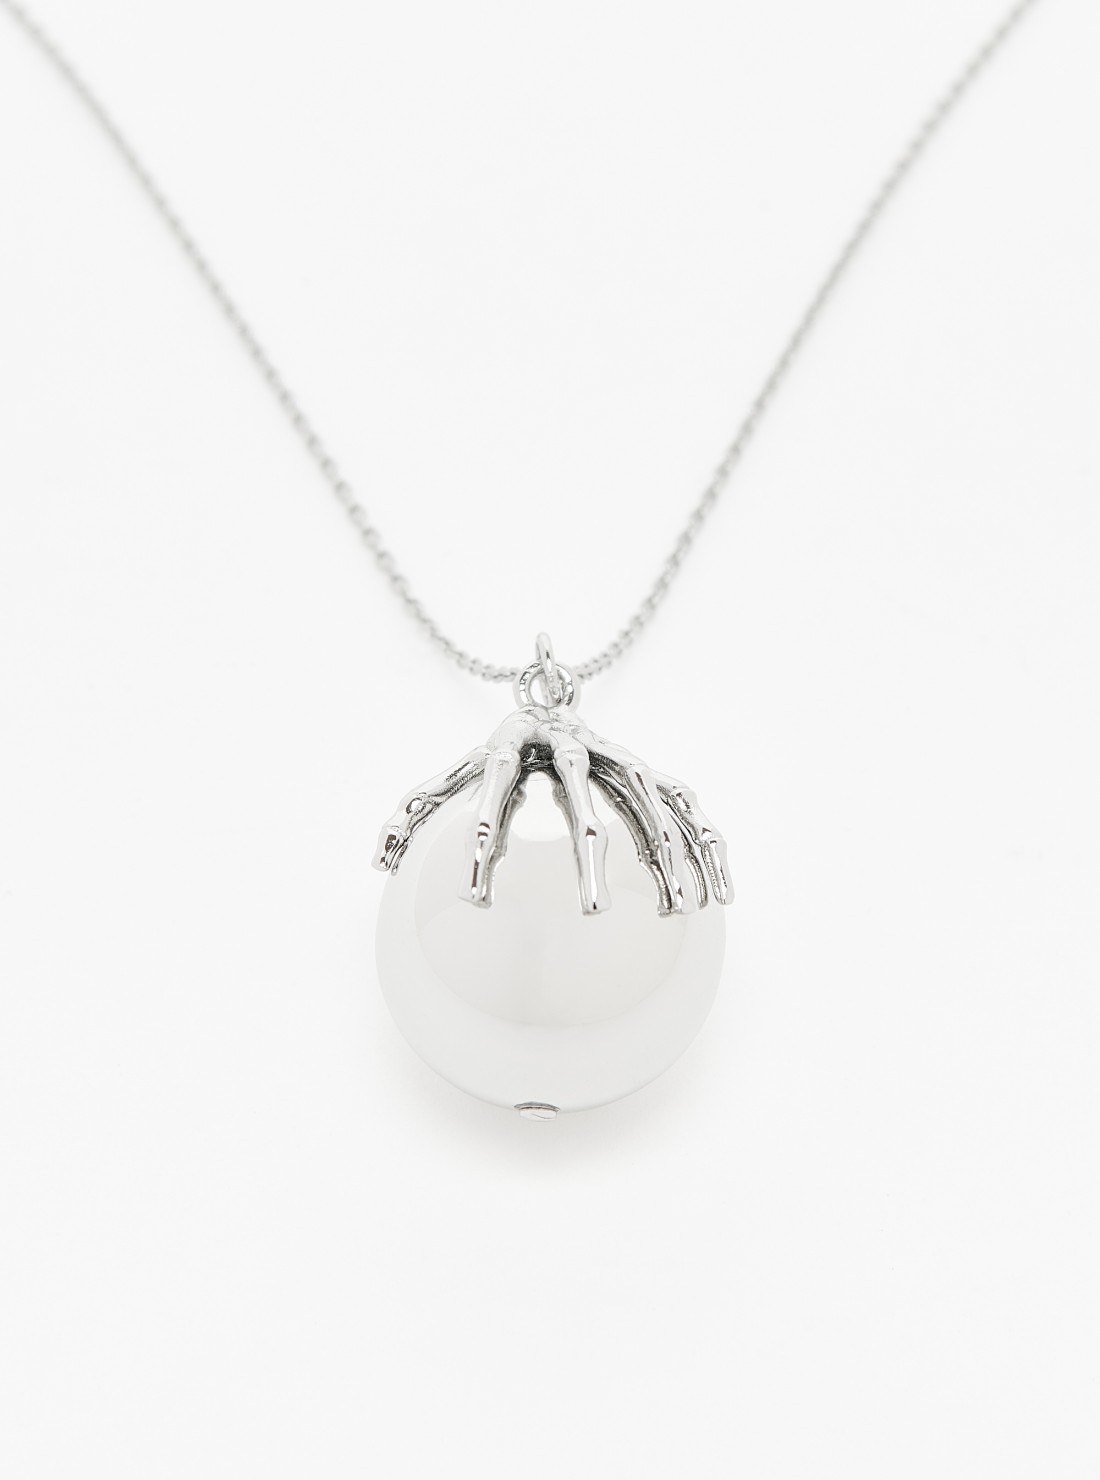 Necklace With Skeleton Hand